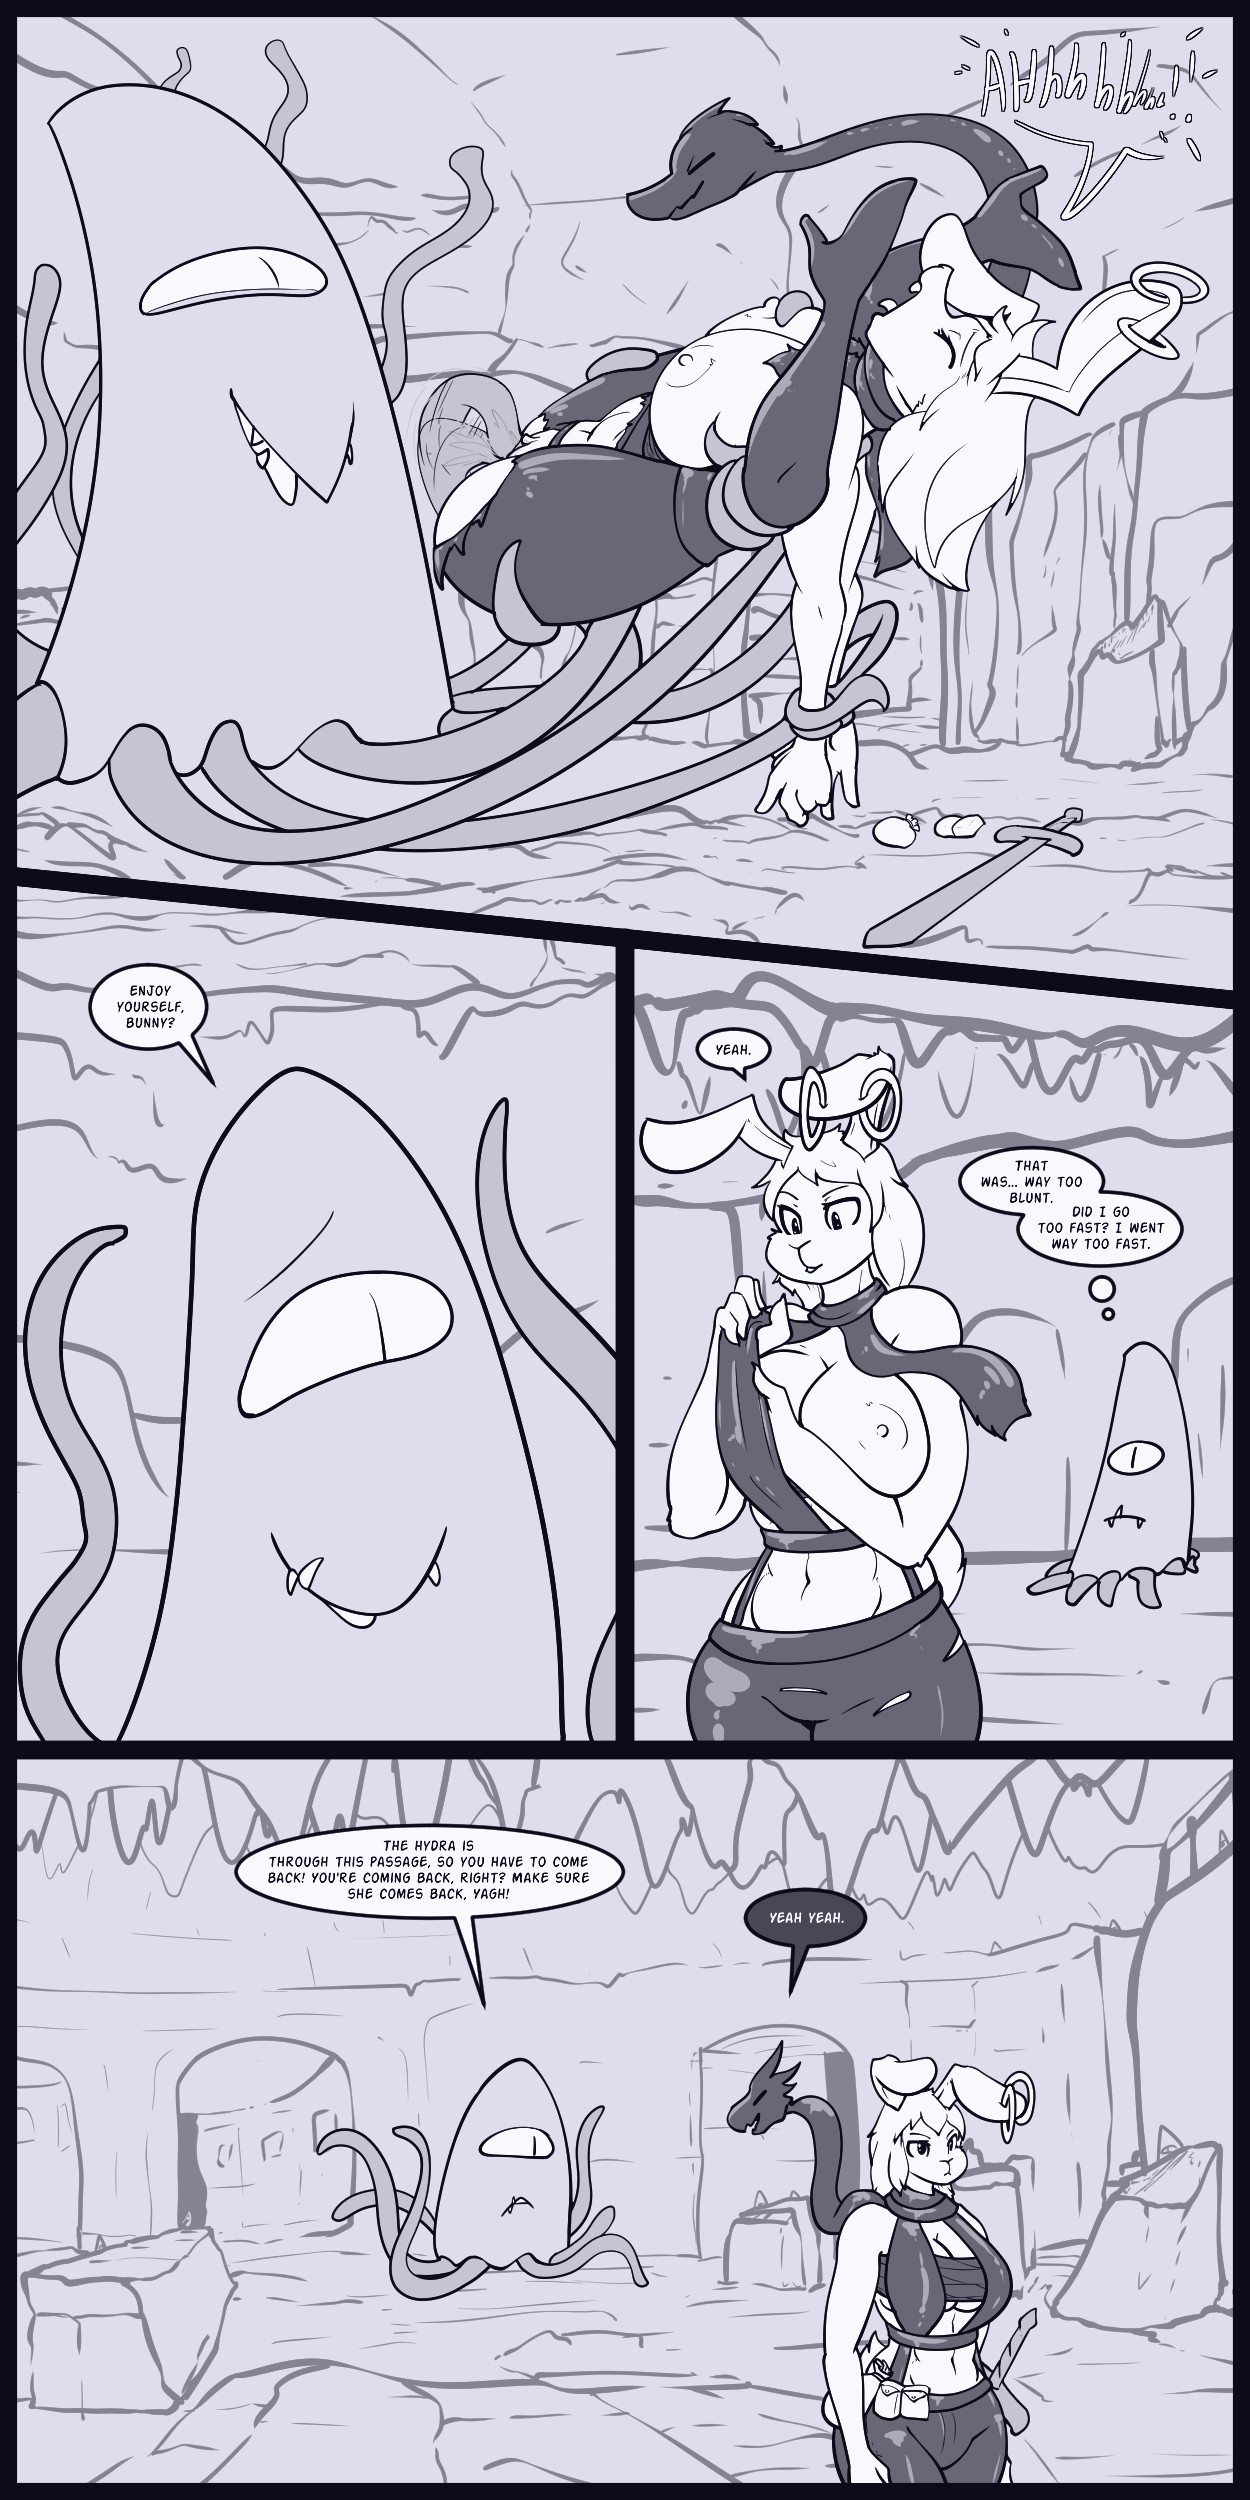 Rough Situation 2 page 08